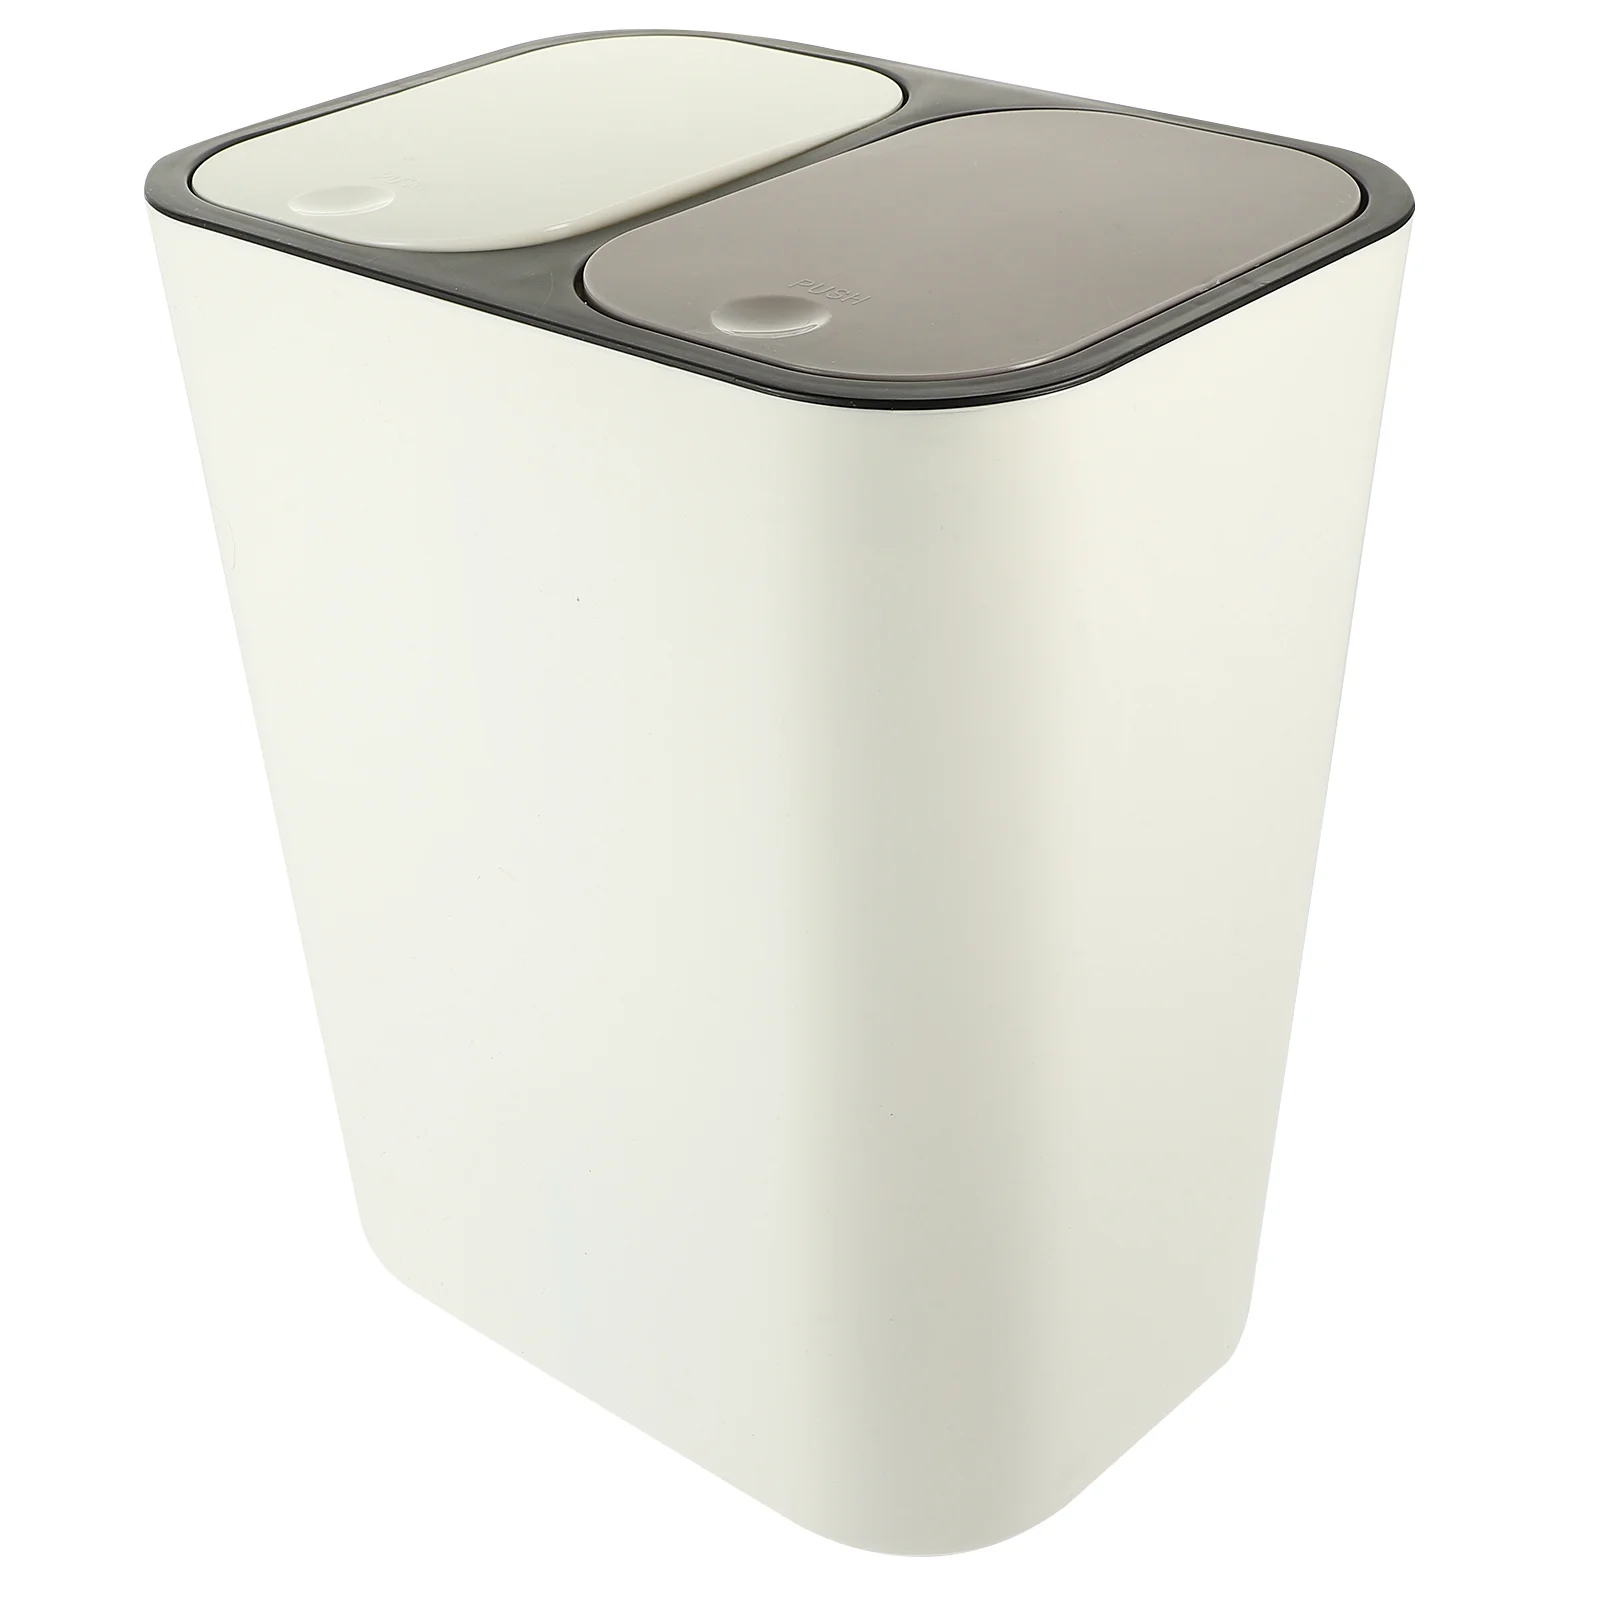 

Waste Compartment Trash Can Container Cans Bins Dual Compactor Trashcan Press Recycling Lid Garbage Recycle Paper Bin Kitchen